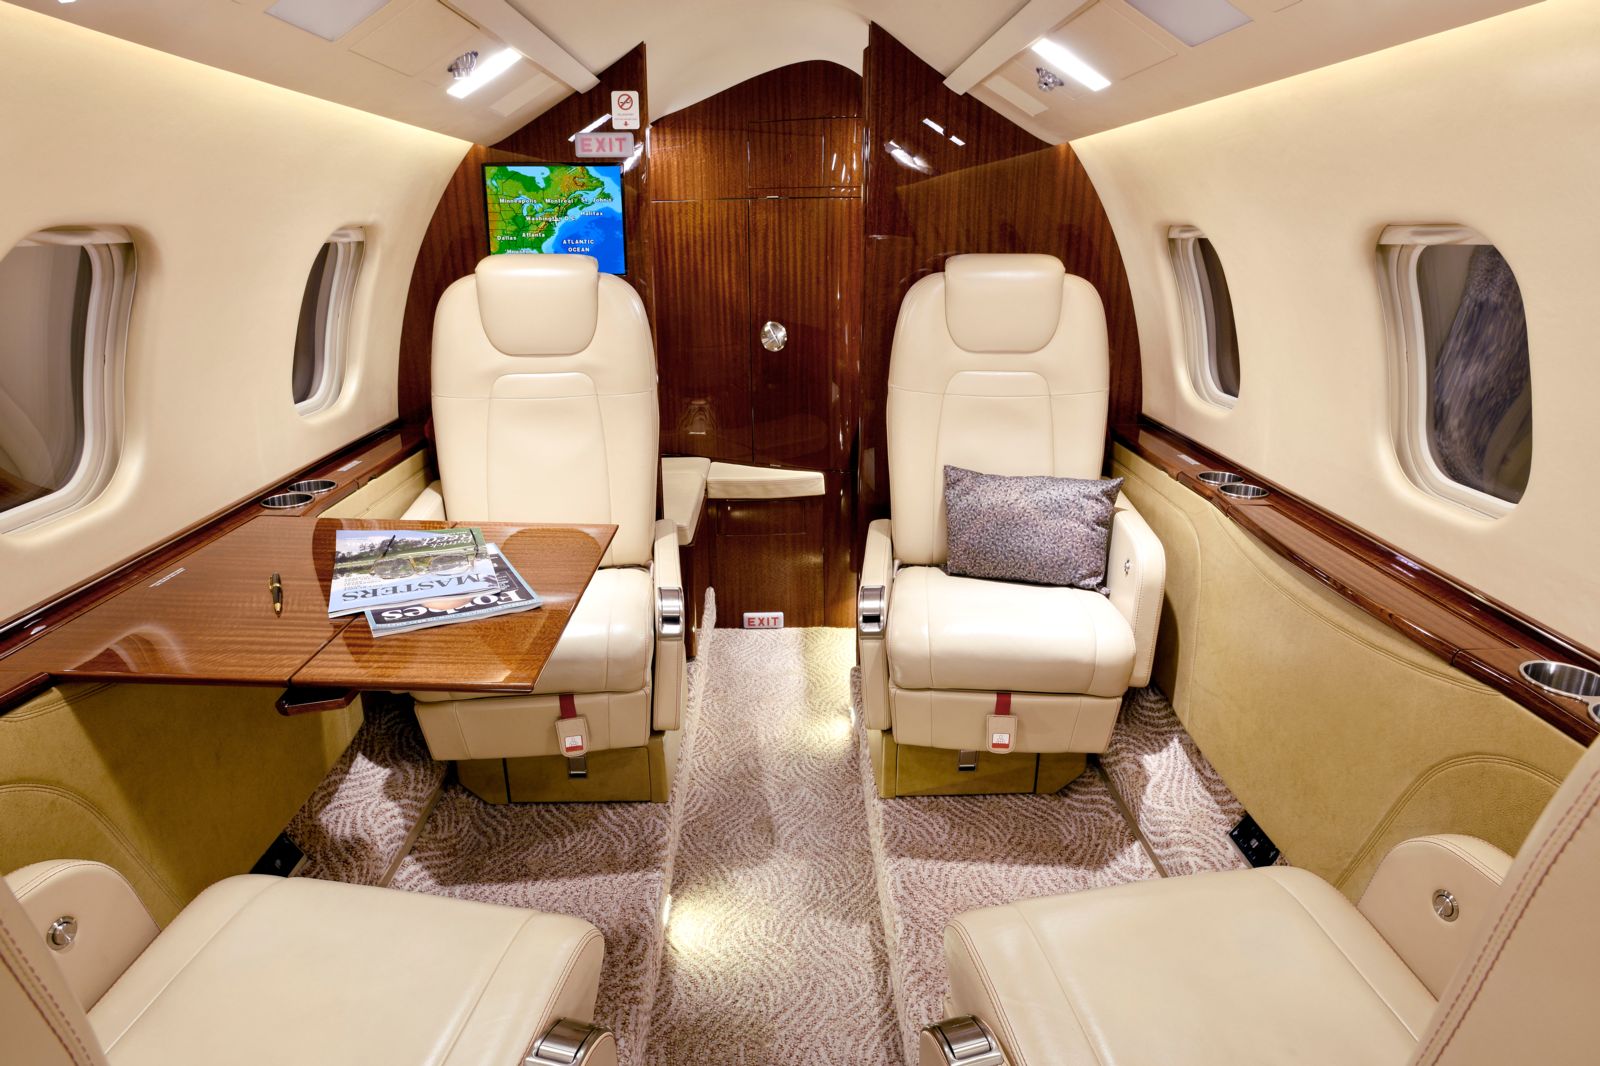 Bombardier Learjet 60XR  S/N 60-424 for sale | gallery image: /userfiles/images/aircraft-listing/Learjet_60XR_sn60-424/aft%20aft.jpg